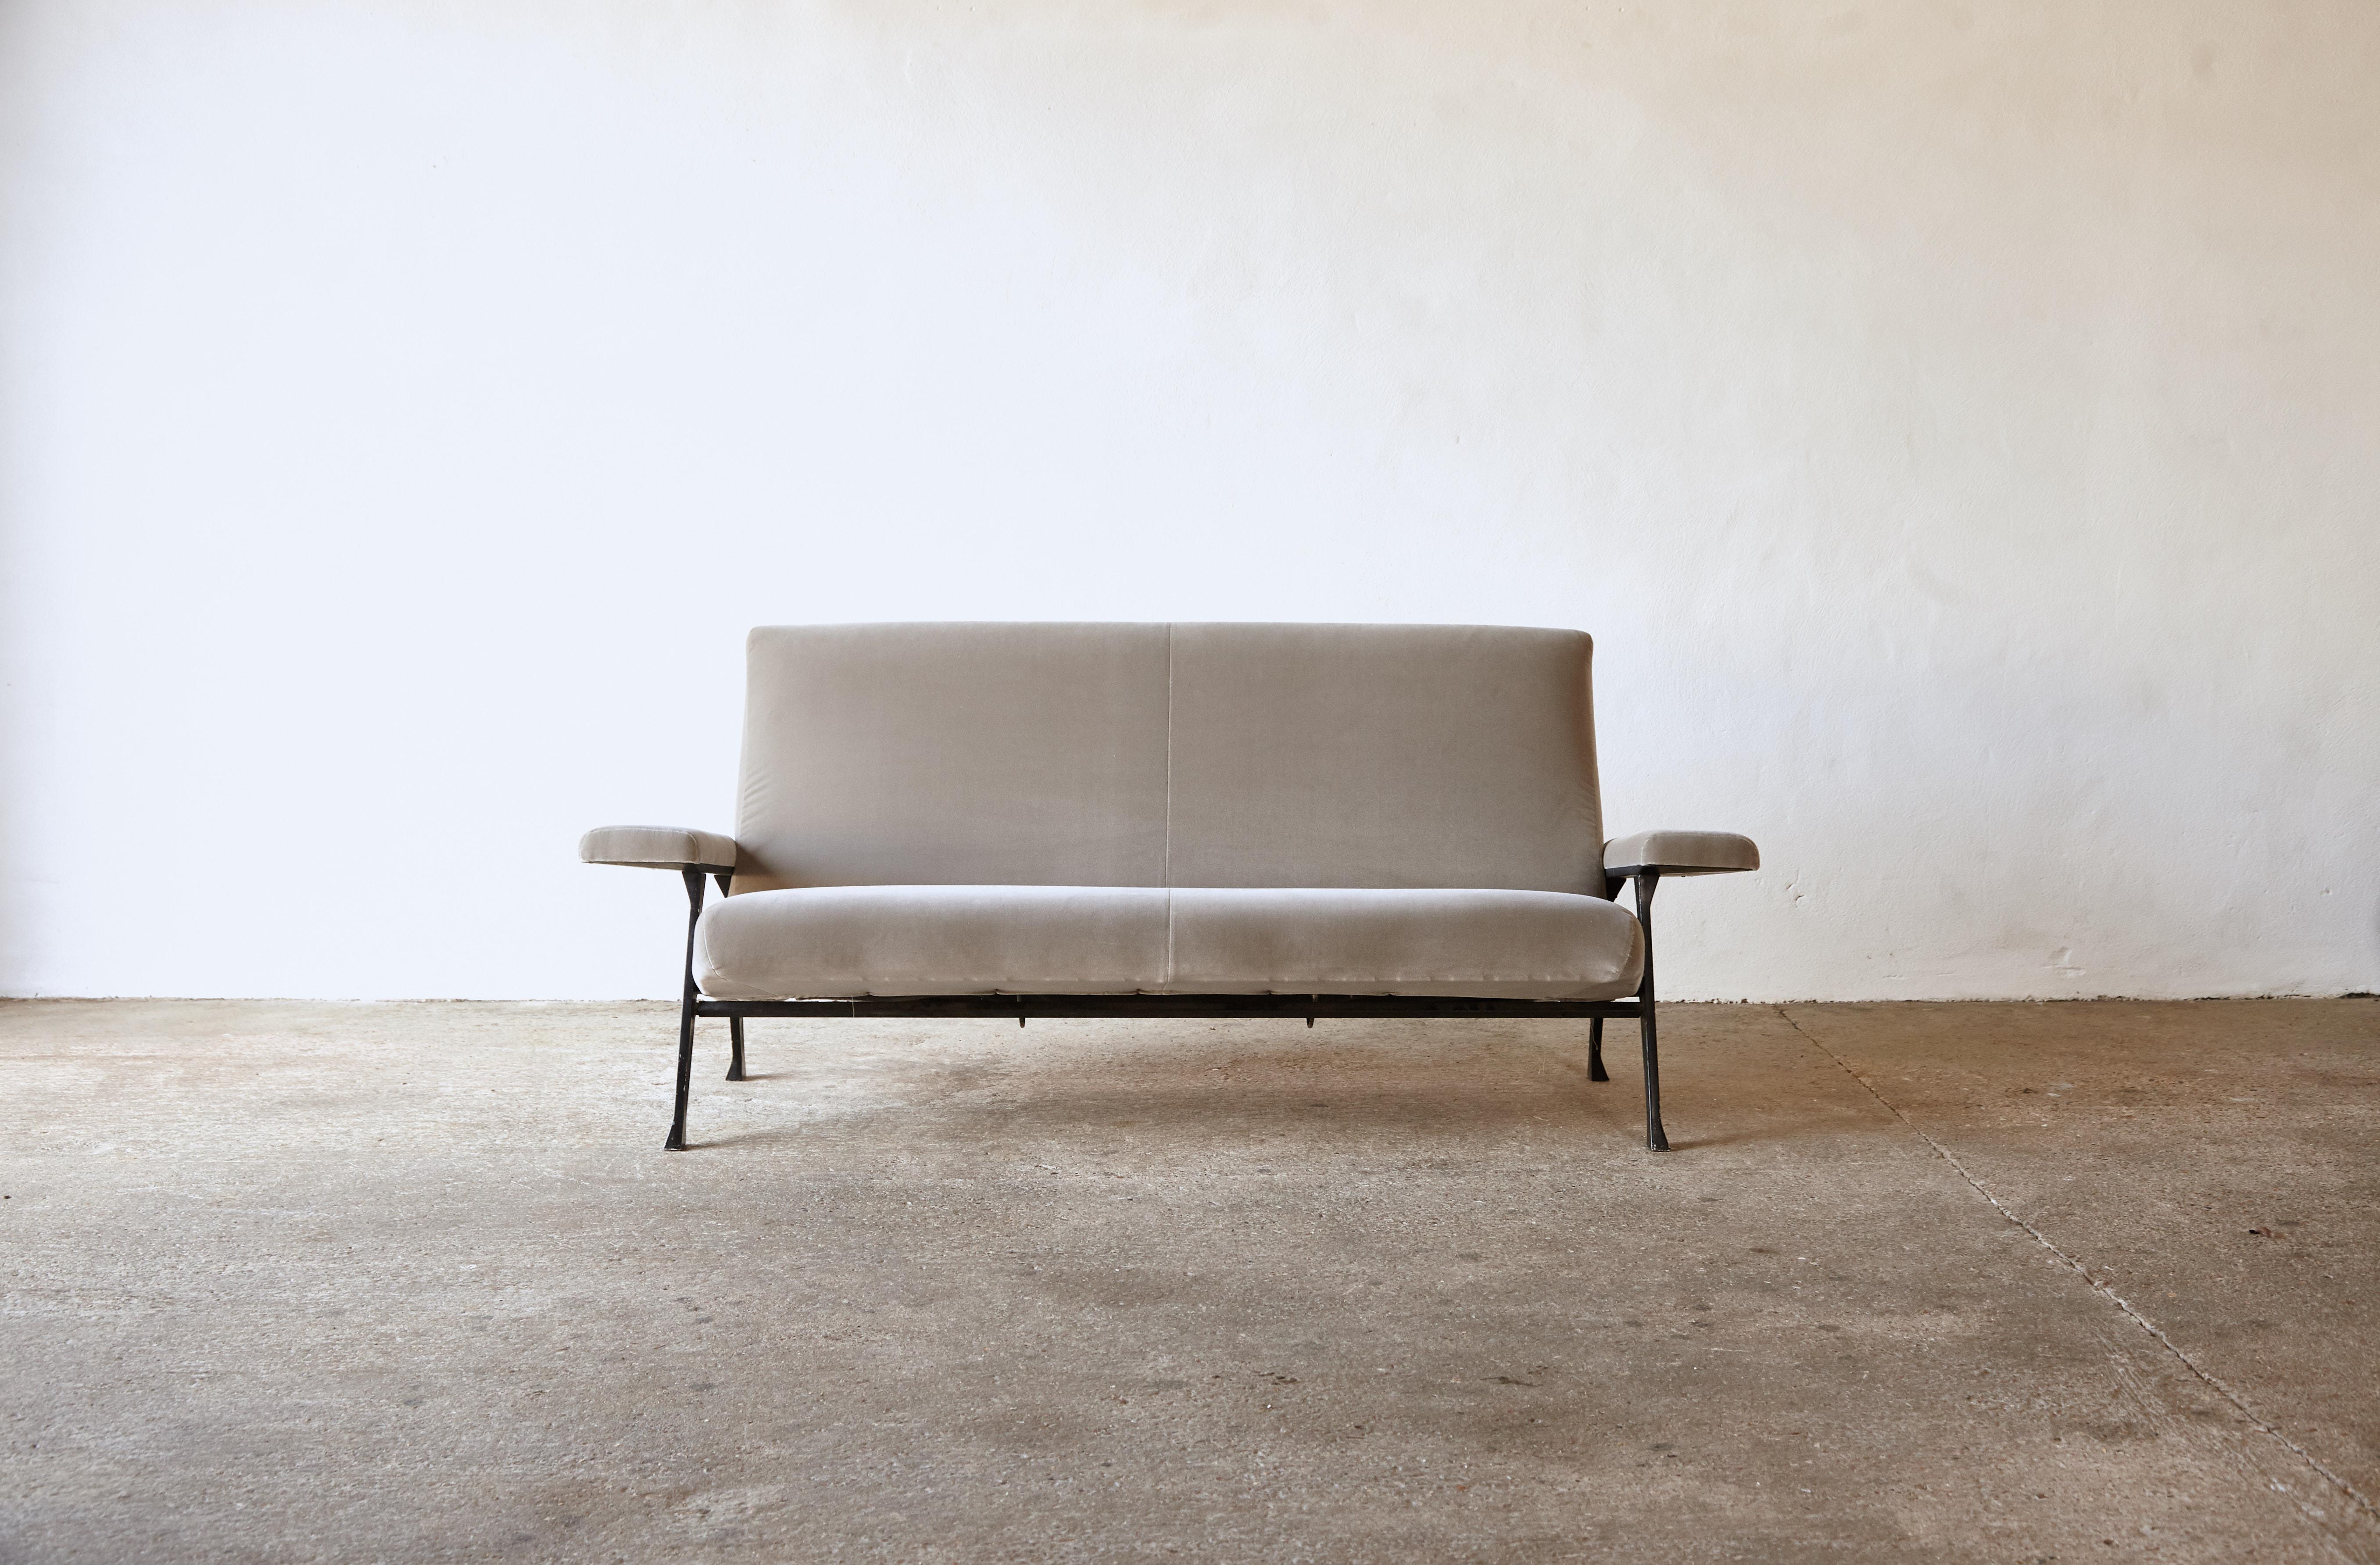 An original and rare early Roberto Menghi hall sofa, produced by Arflex, Italy, 1950s. Newly upholstered in silver / grey velvet. The sofa is very comfortable and in good structural condition, with minor age related signs of age to the metal